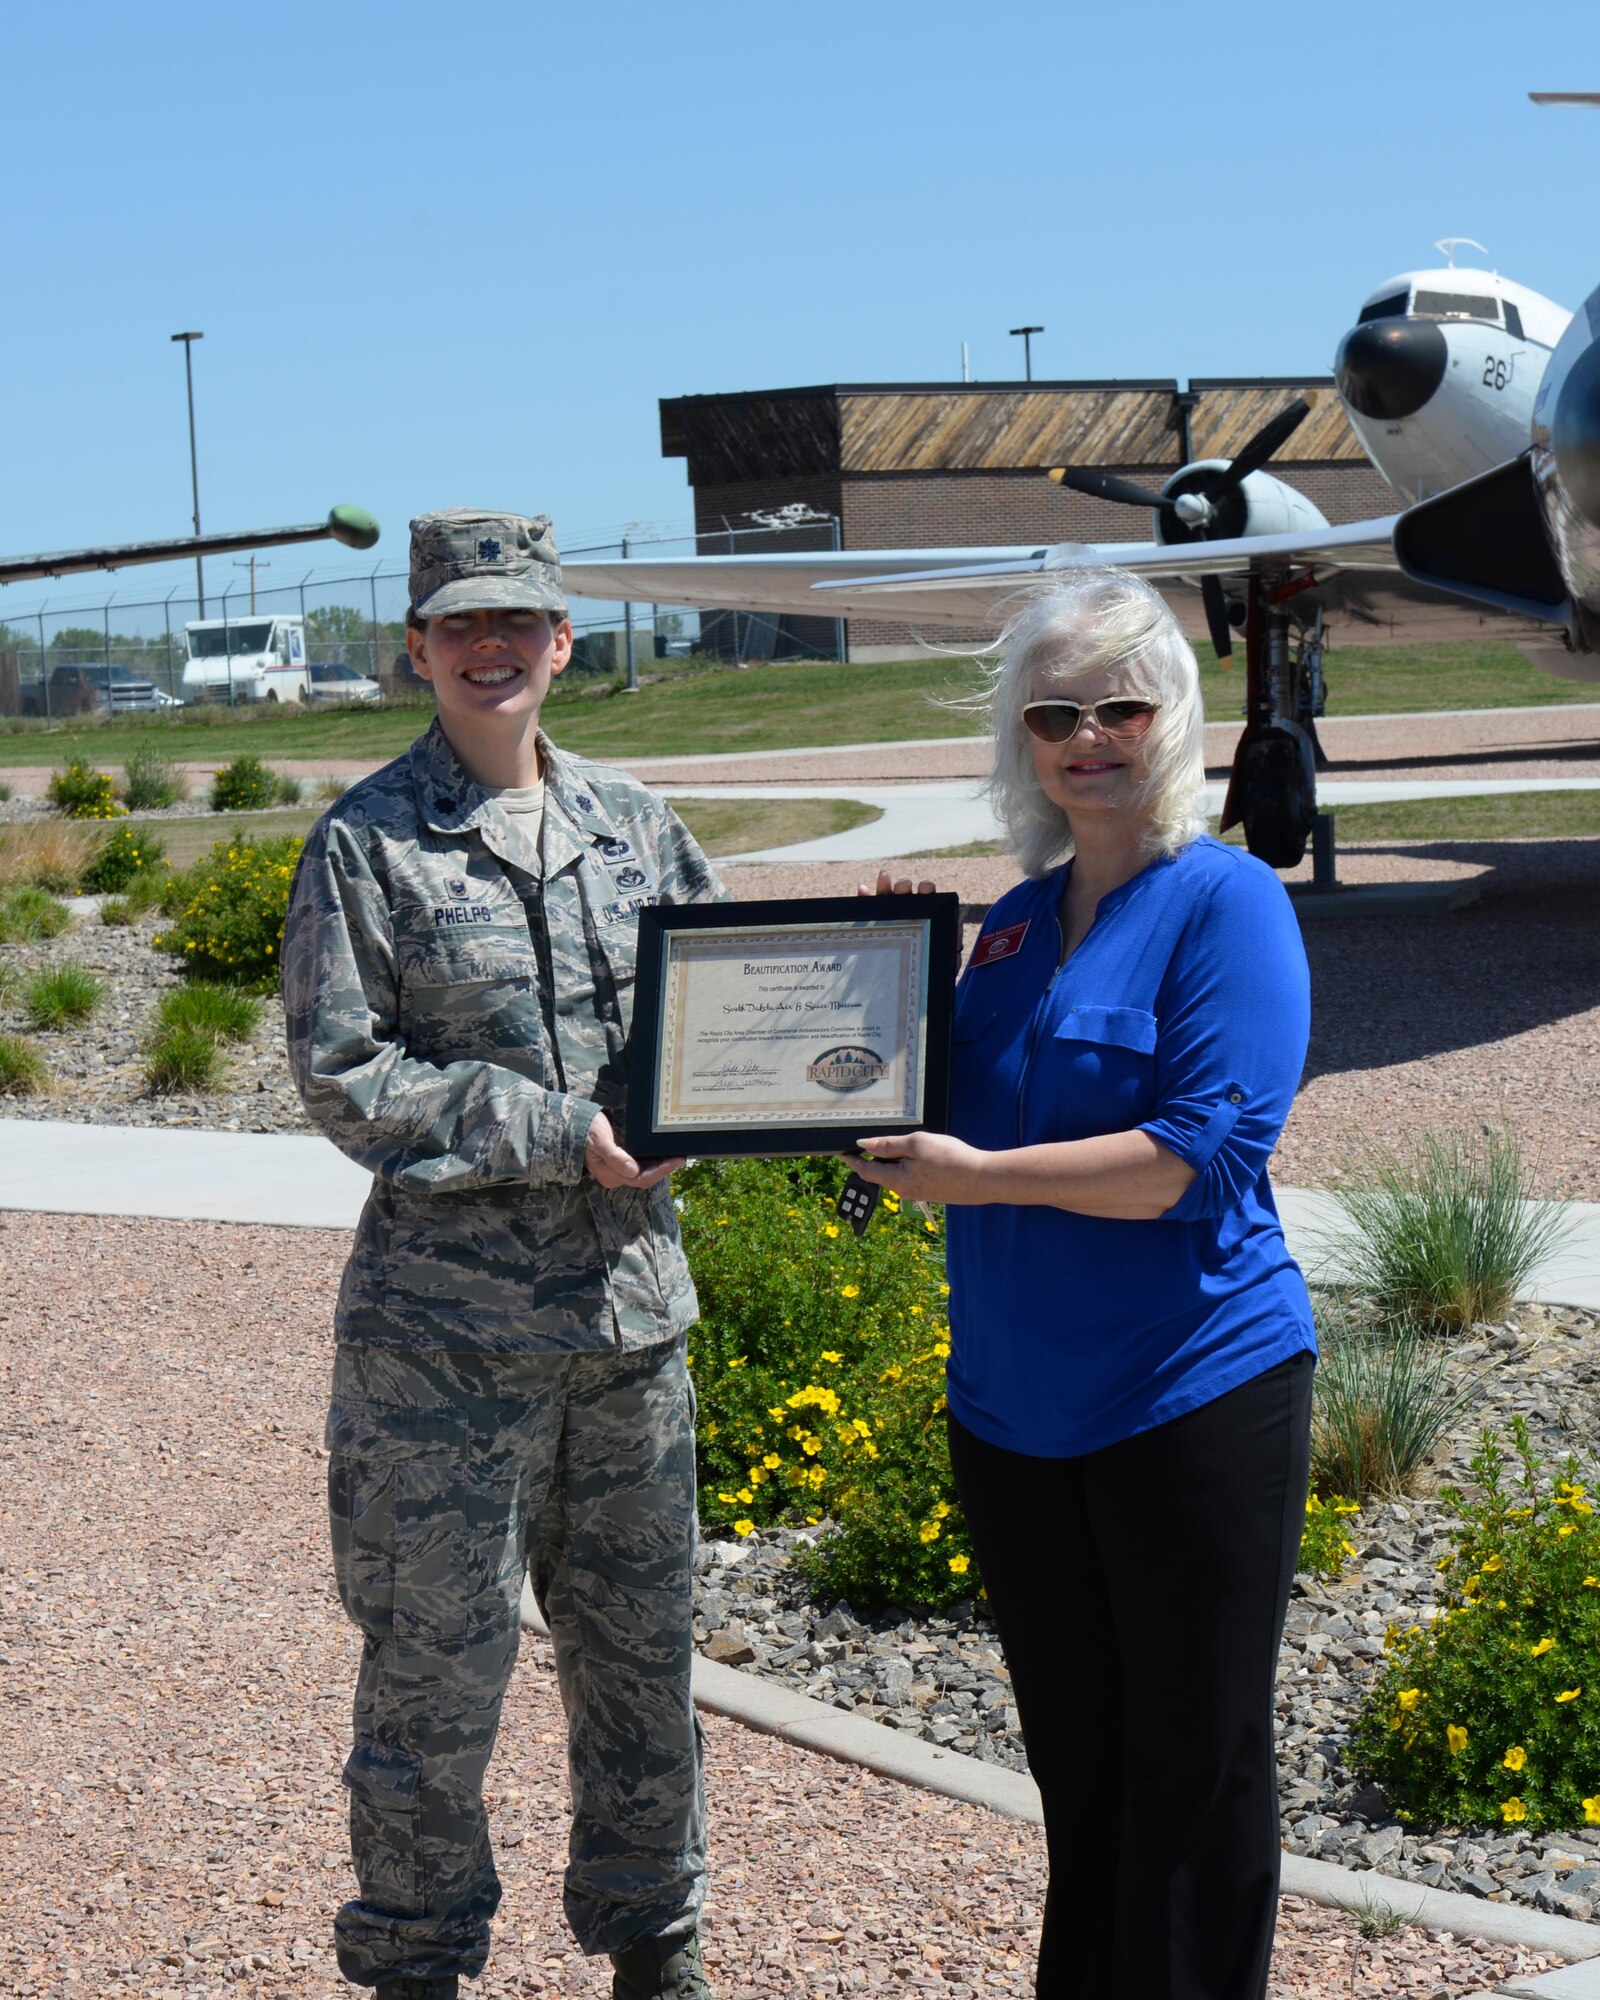 Lt. Col. Jennifer Phelps, commander of the 28th Civil Engineer Squadron, accepts the June 2017 Beautification and Revitalization Award from Vesta Wells Johnson, chairman of the beautification committee of the Rapid City Area Chamber of Commerce, at the South Dakota Air and Space Museum in Box Elder, S.D., May 31, 2017. The award is presented to a local business or agency that has completed projects that enhance the beauty of Rapid City. (U.S. Air Force photo by Airman Nicolas Z. Erwin)